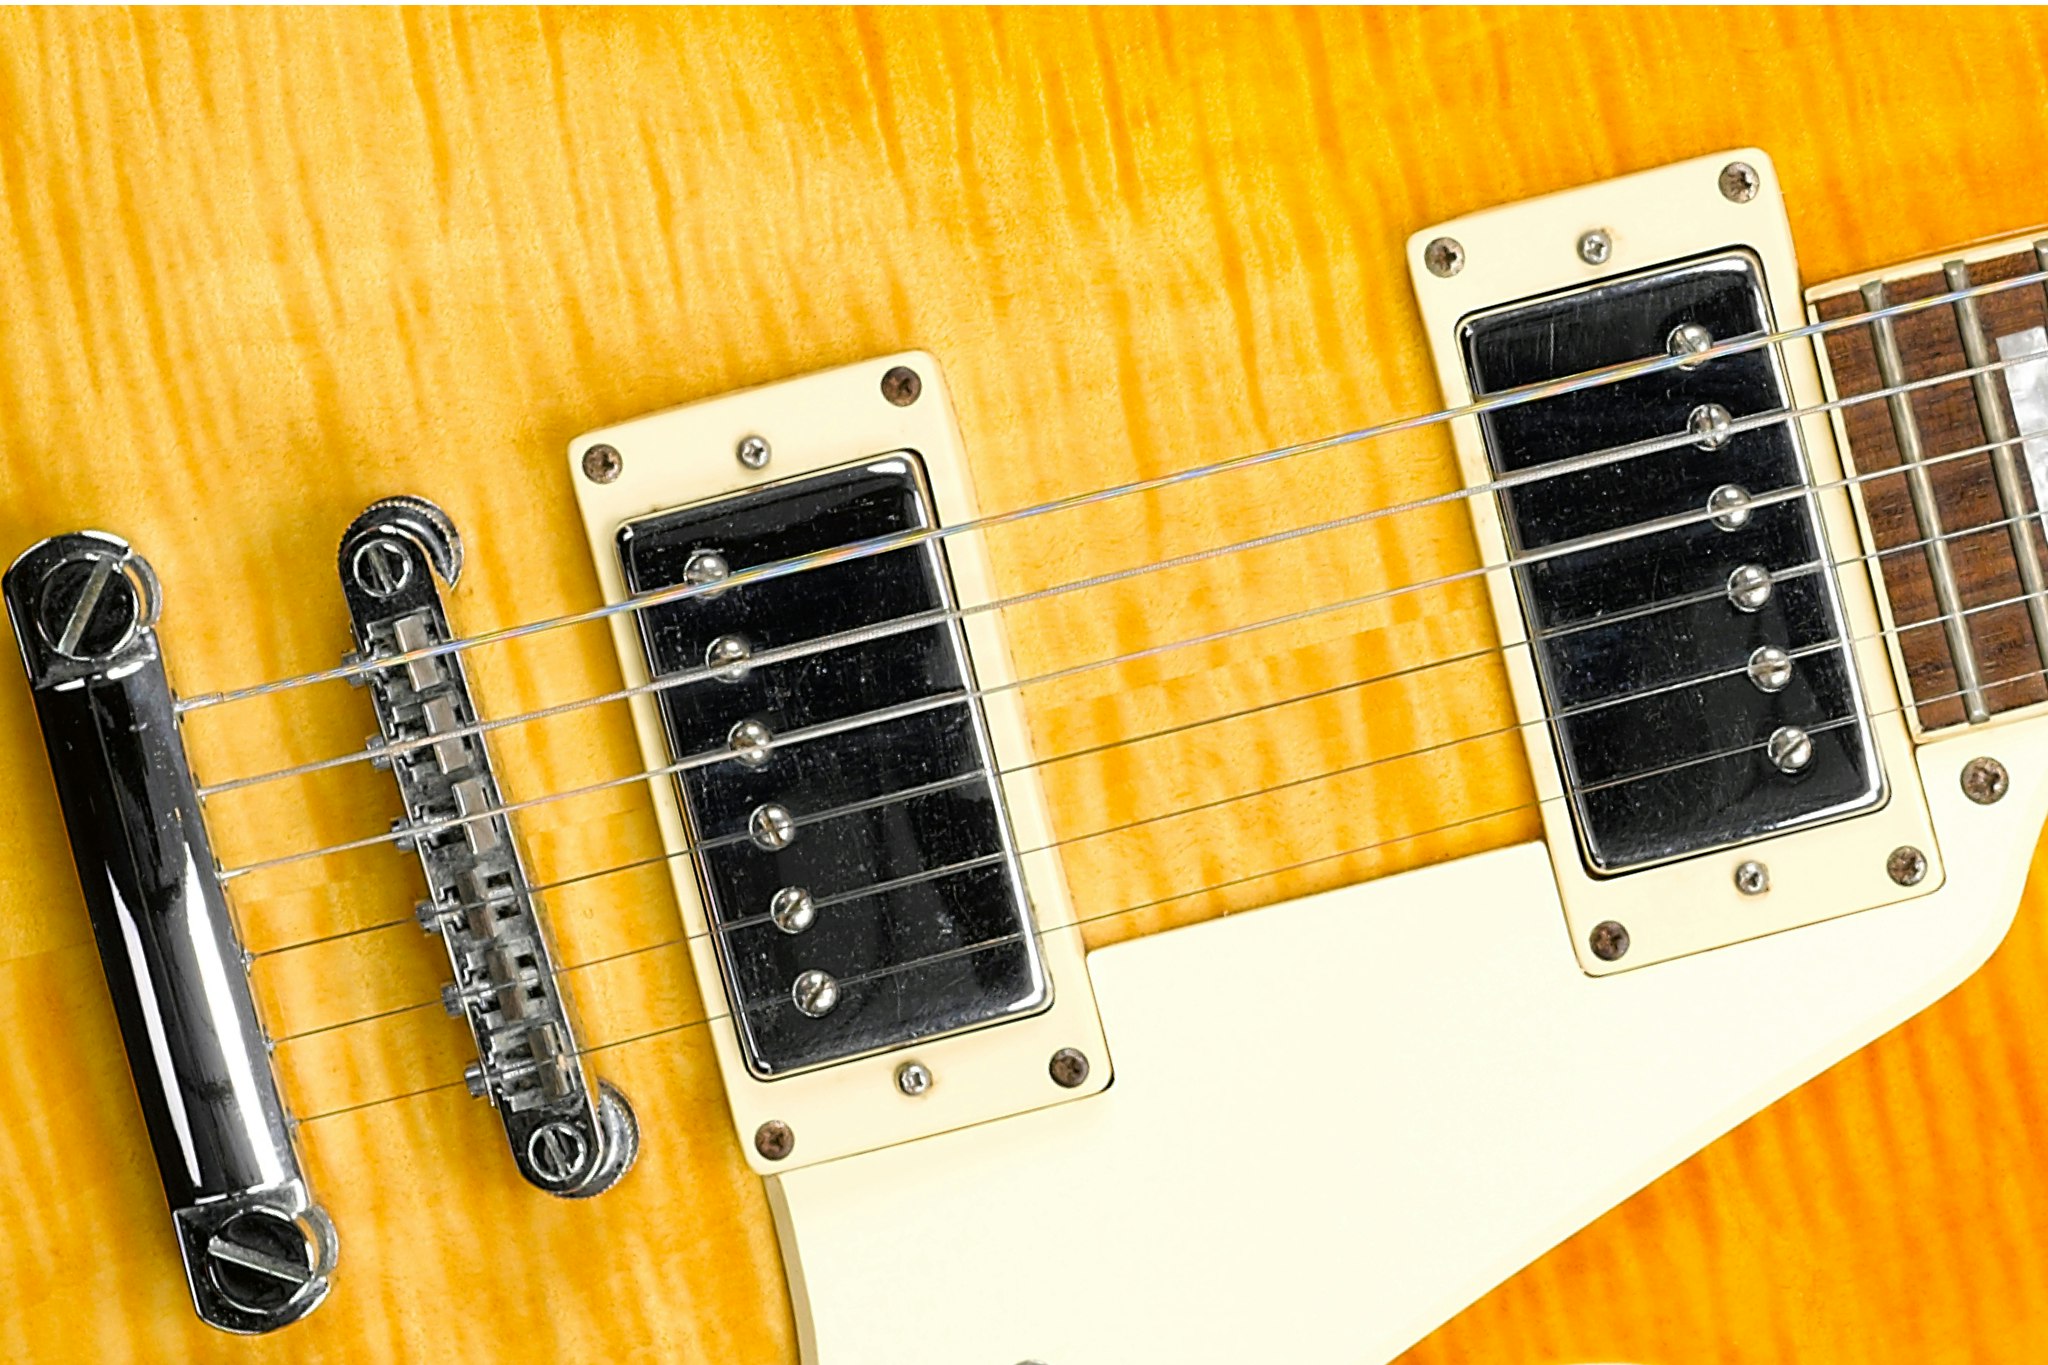 Learn the Anatomy of the Electric Guitar